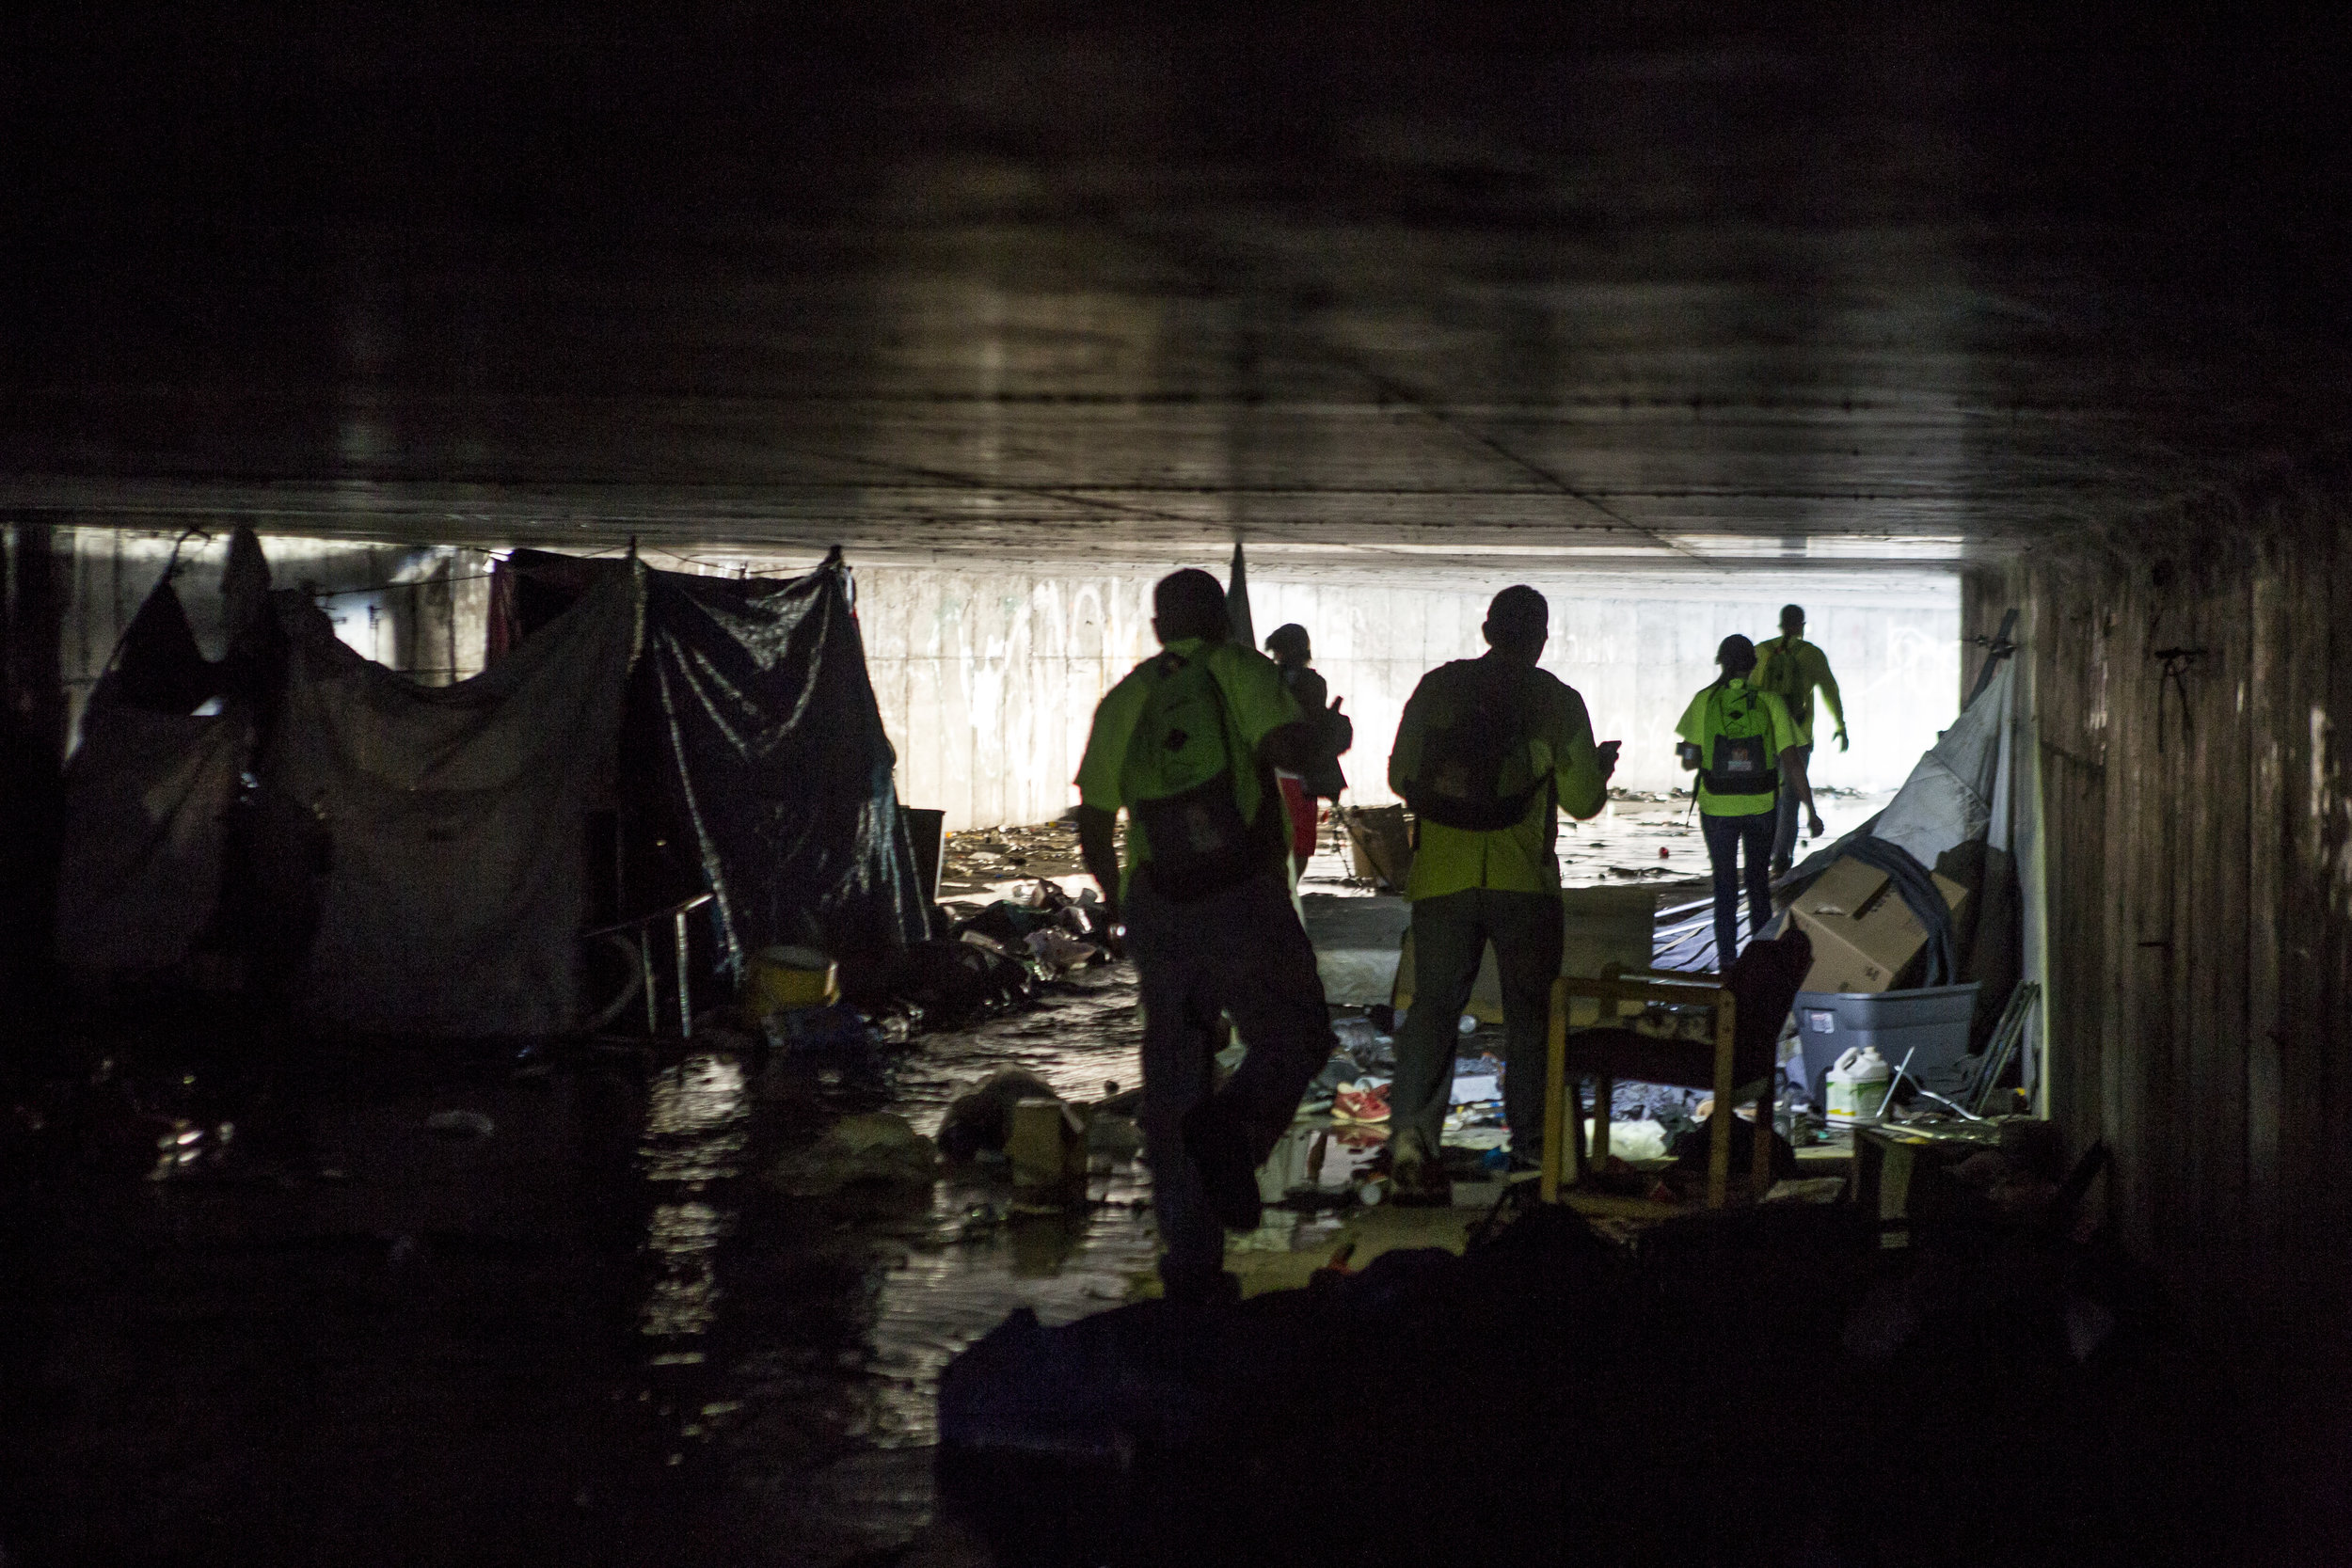  The HELP of Southern Nevada team exits a flood tunnel near the Hard Rock Hotel and Casino on Tuesday, June 27, 2017.  Patrick Connolly Las Vegas Review-Journal @PConnPie 